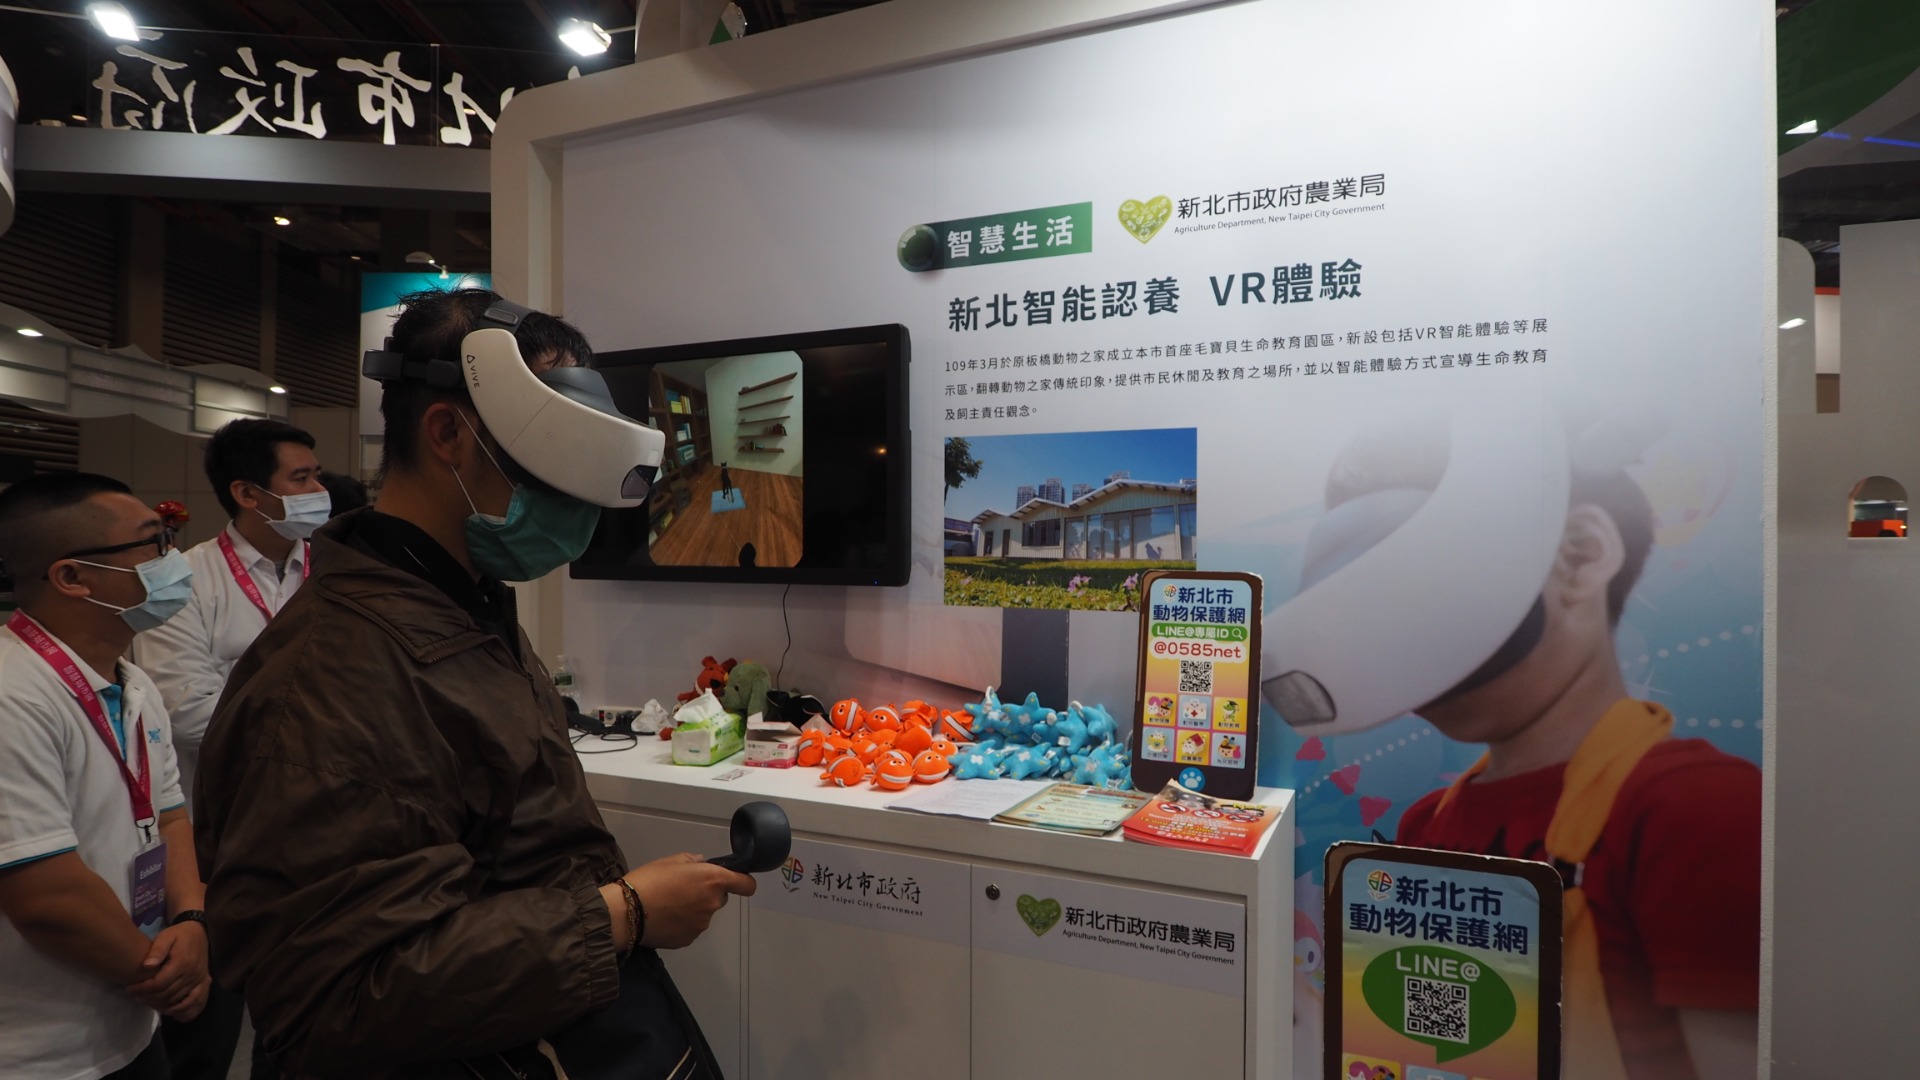 VR virtual reality applied to physical exhibition: 2021 Smart City Exhibition